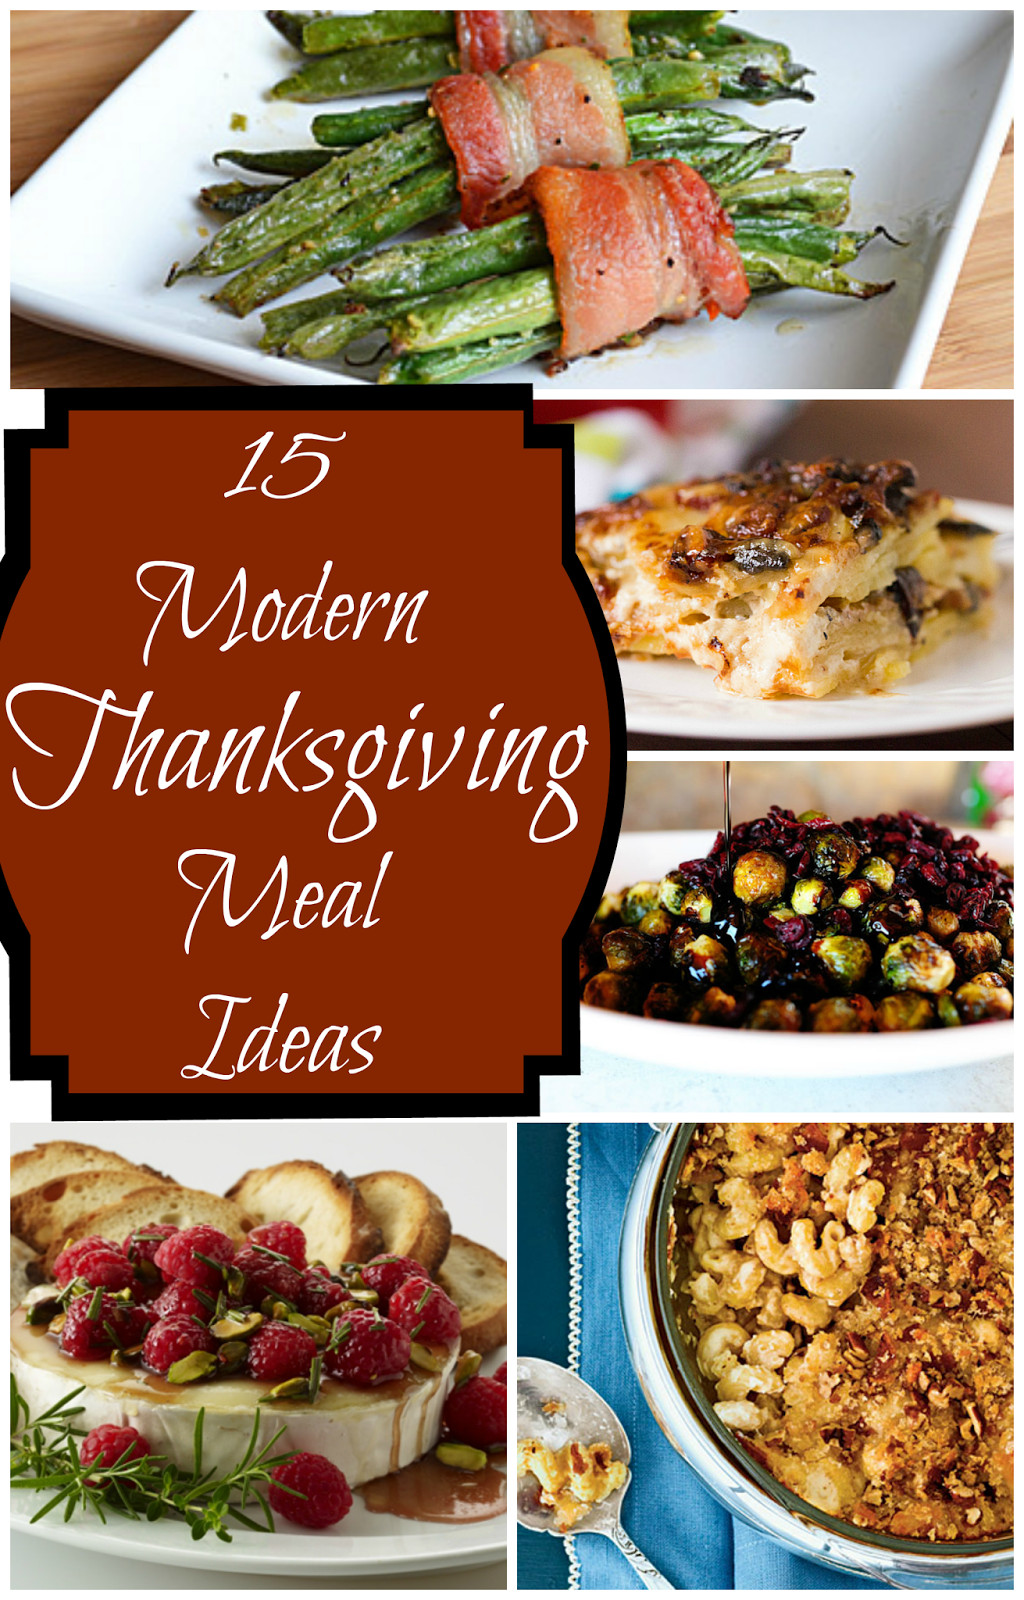 Thanksgiving Recipes Ideas
 Not Your Mother s Recipes 15 Modern Thanksgiving Meal